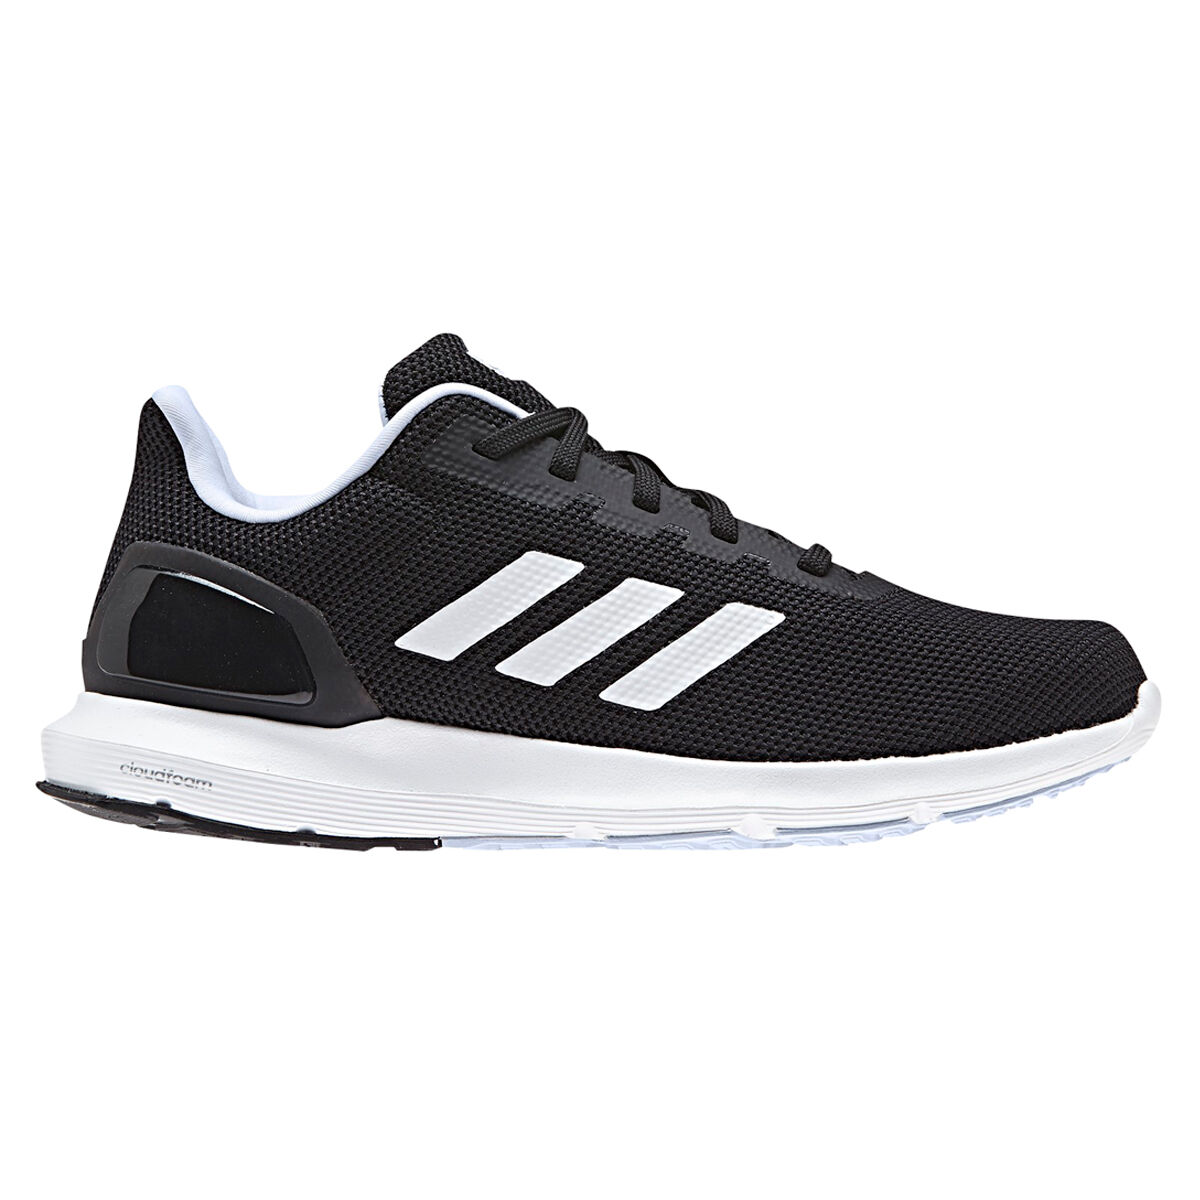 adidas trail shoes women's